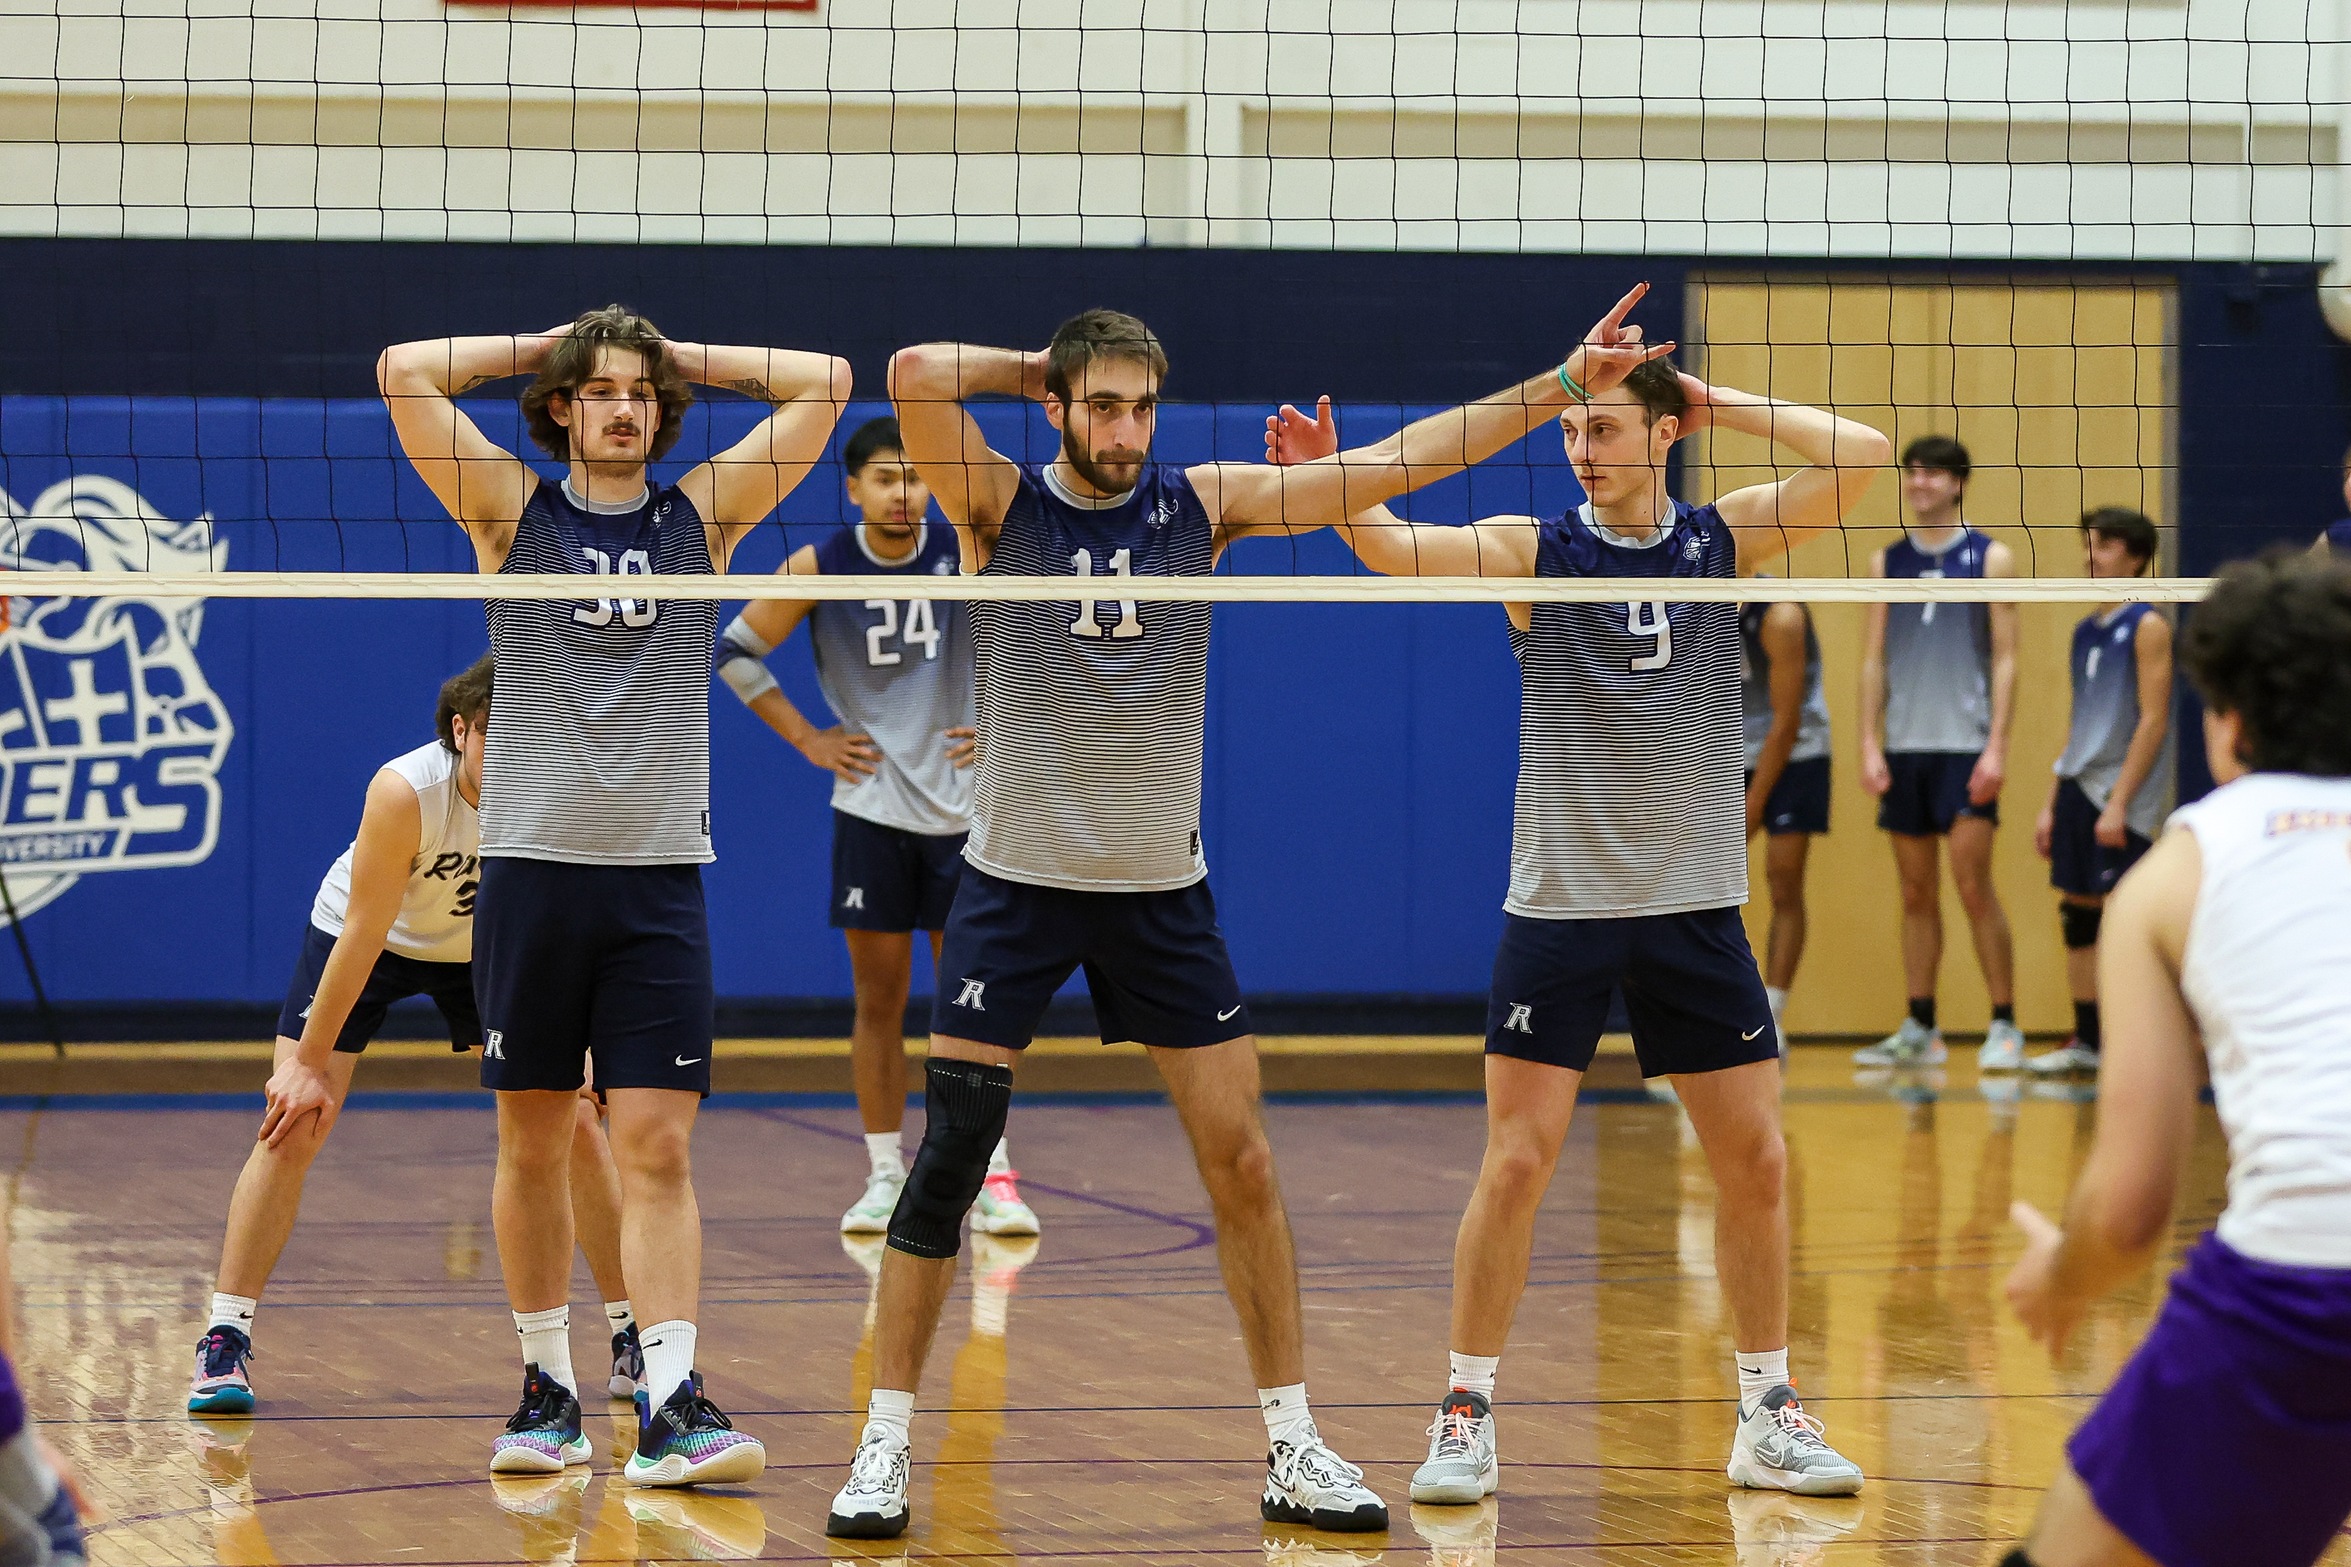 Men’s Volleyball Splits with Emmanuel and Lasell